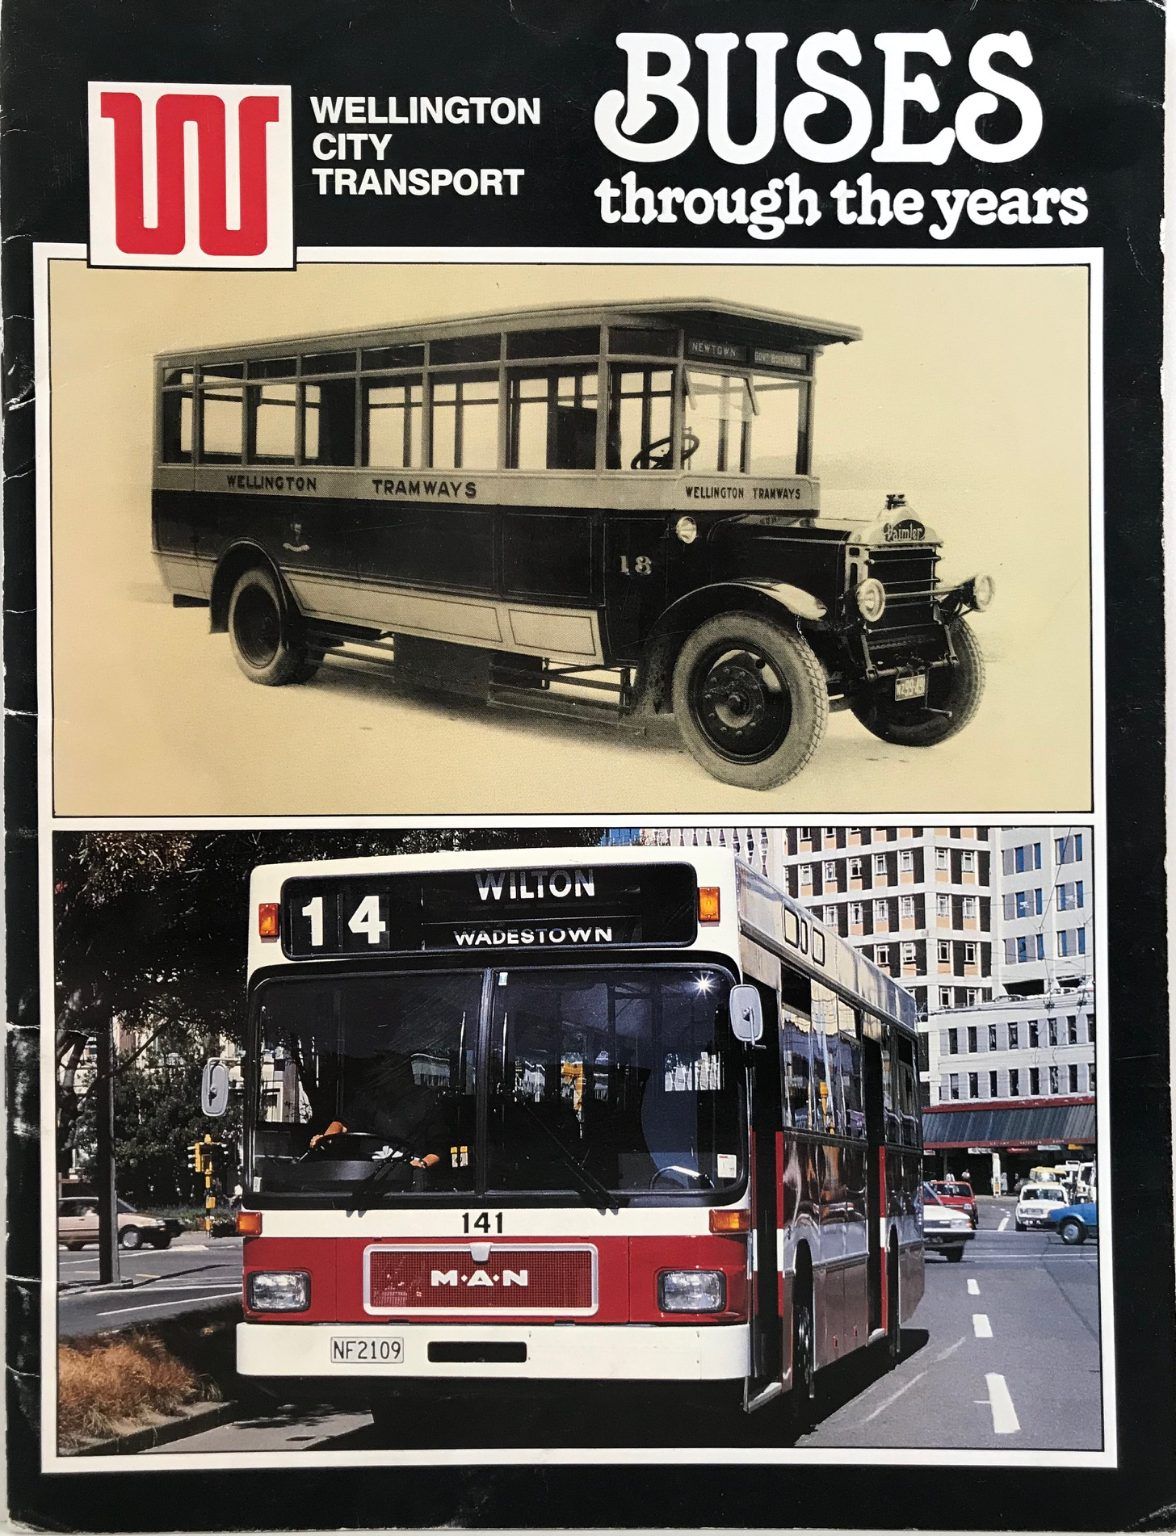 BUSES THROUGH THE YEARS: Wellington City Transport